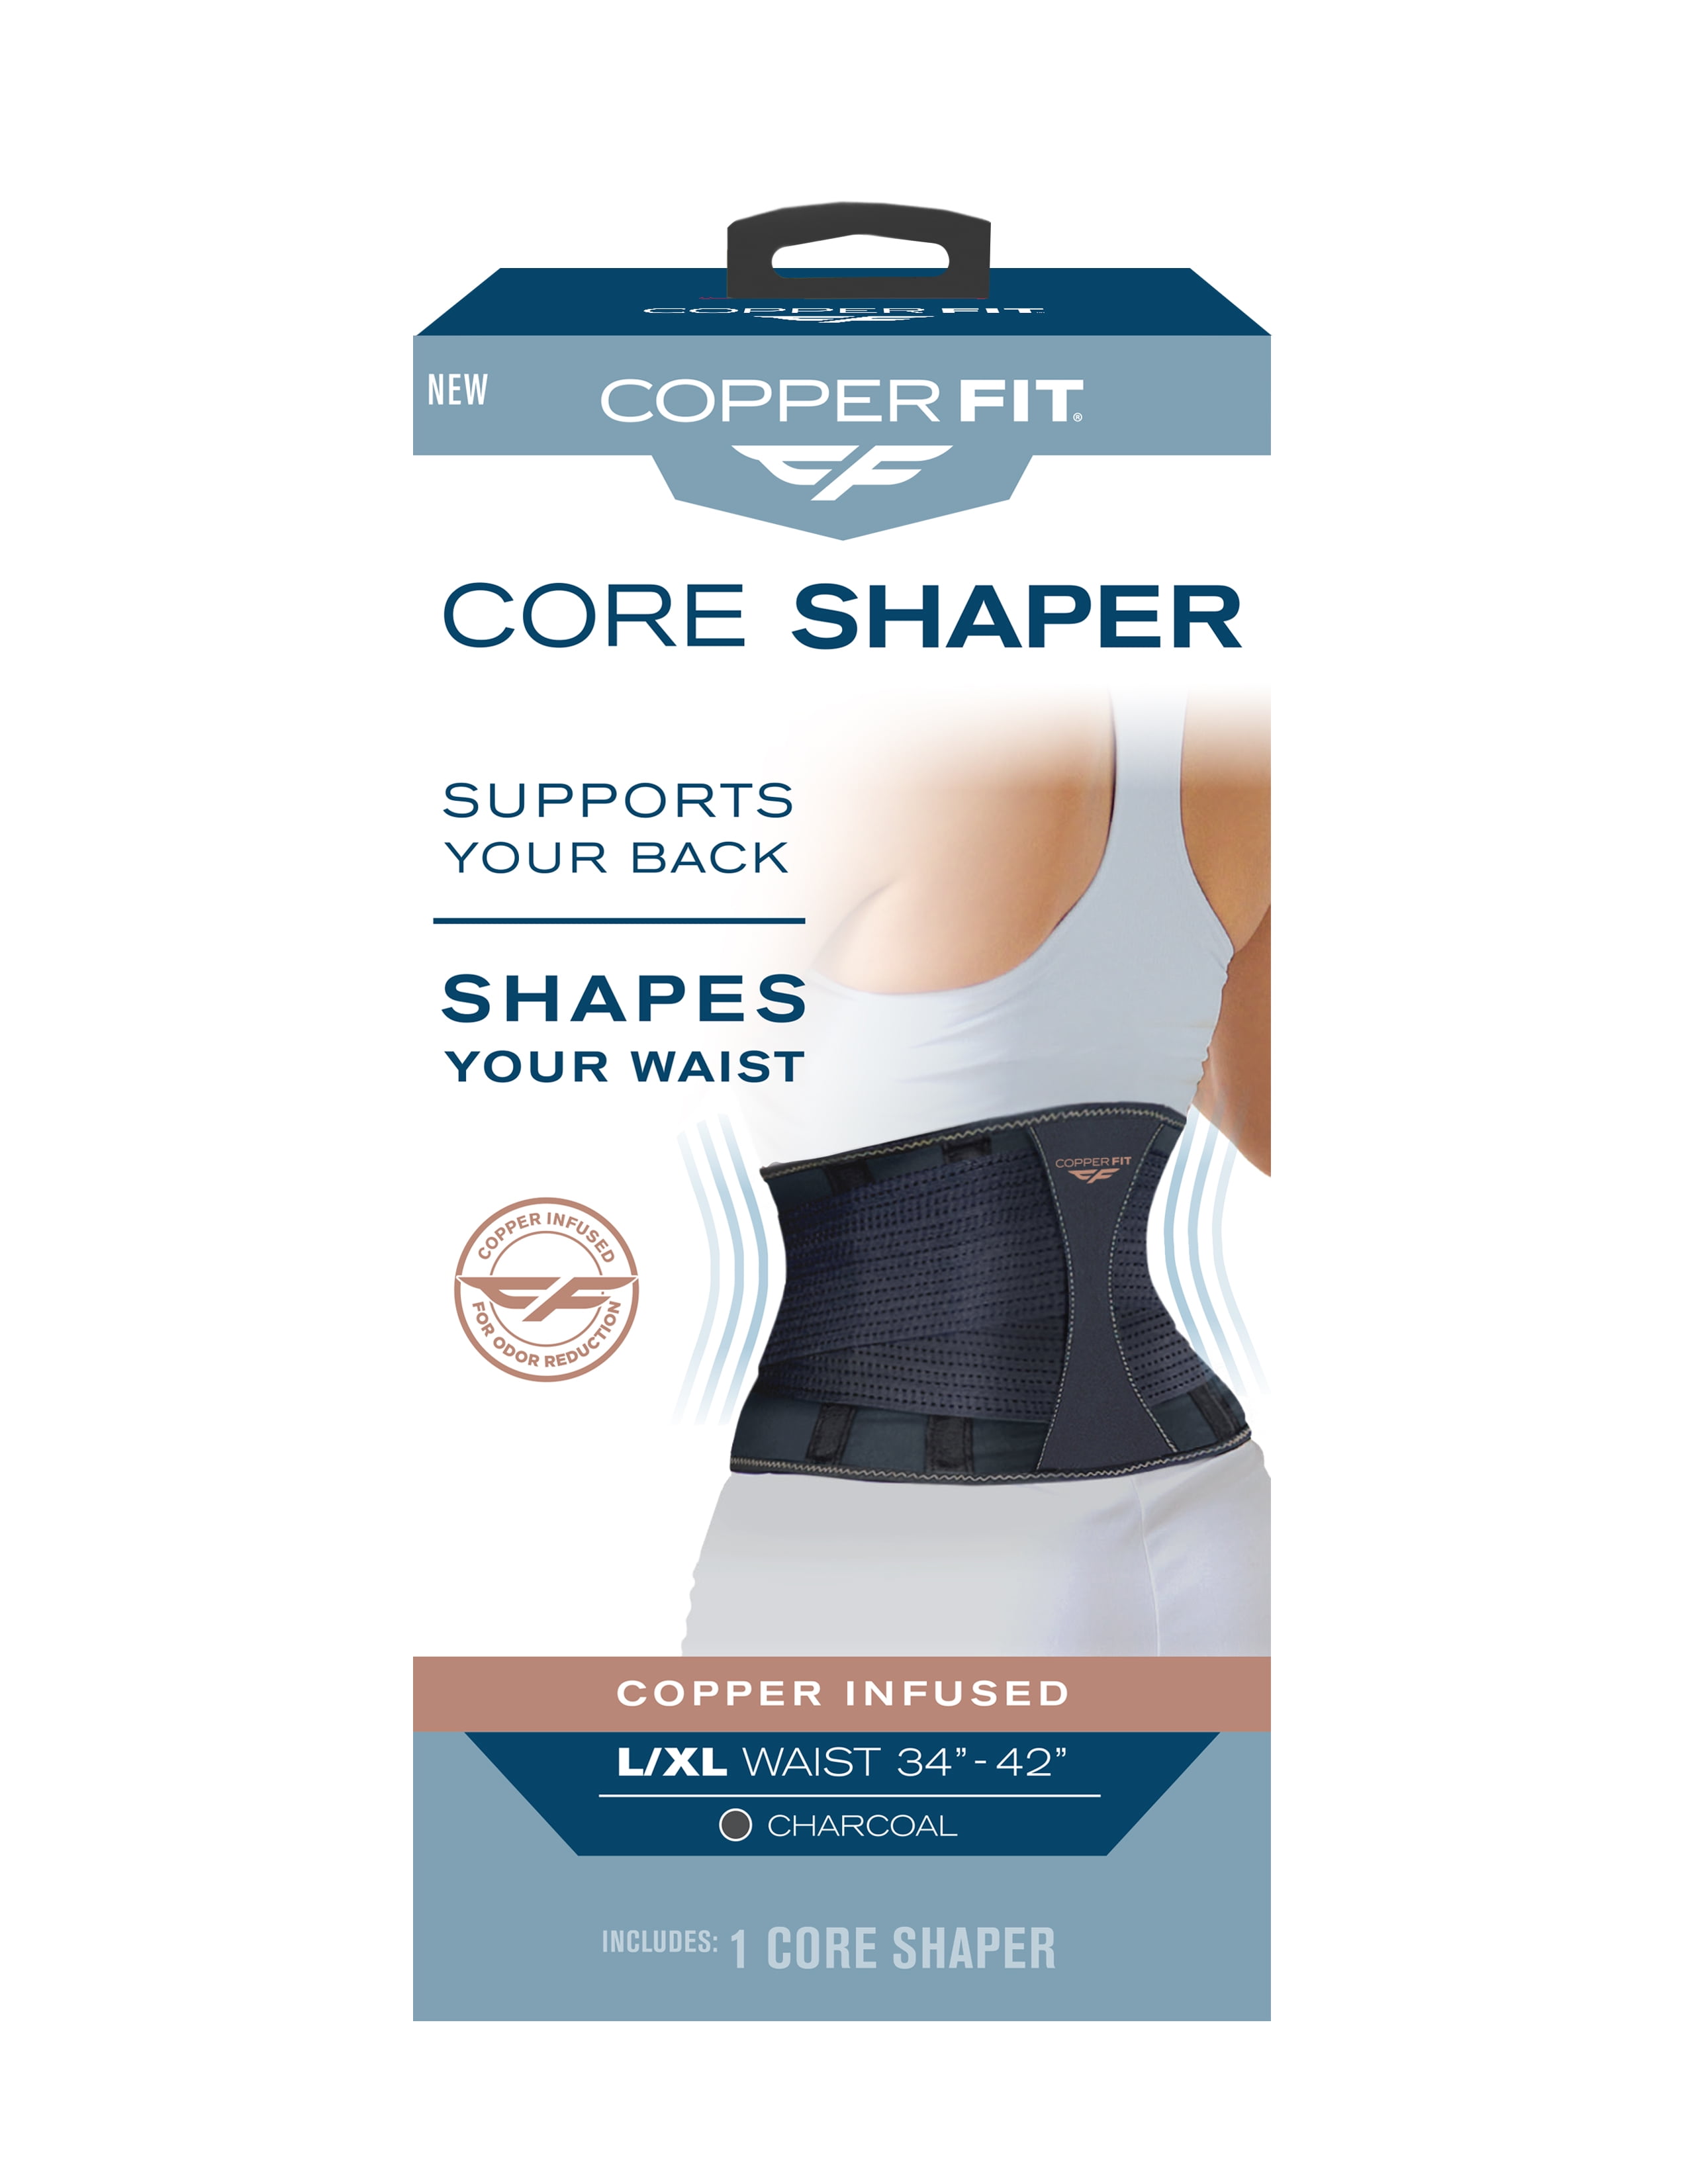 Copper Fit Core Shaper Size S/M 26” to 34”Charcoal Color NEW OPEN